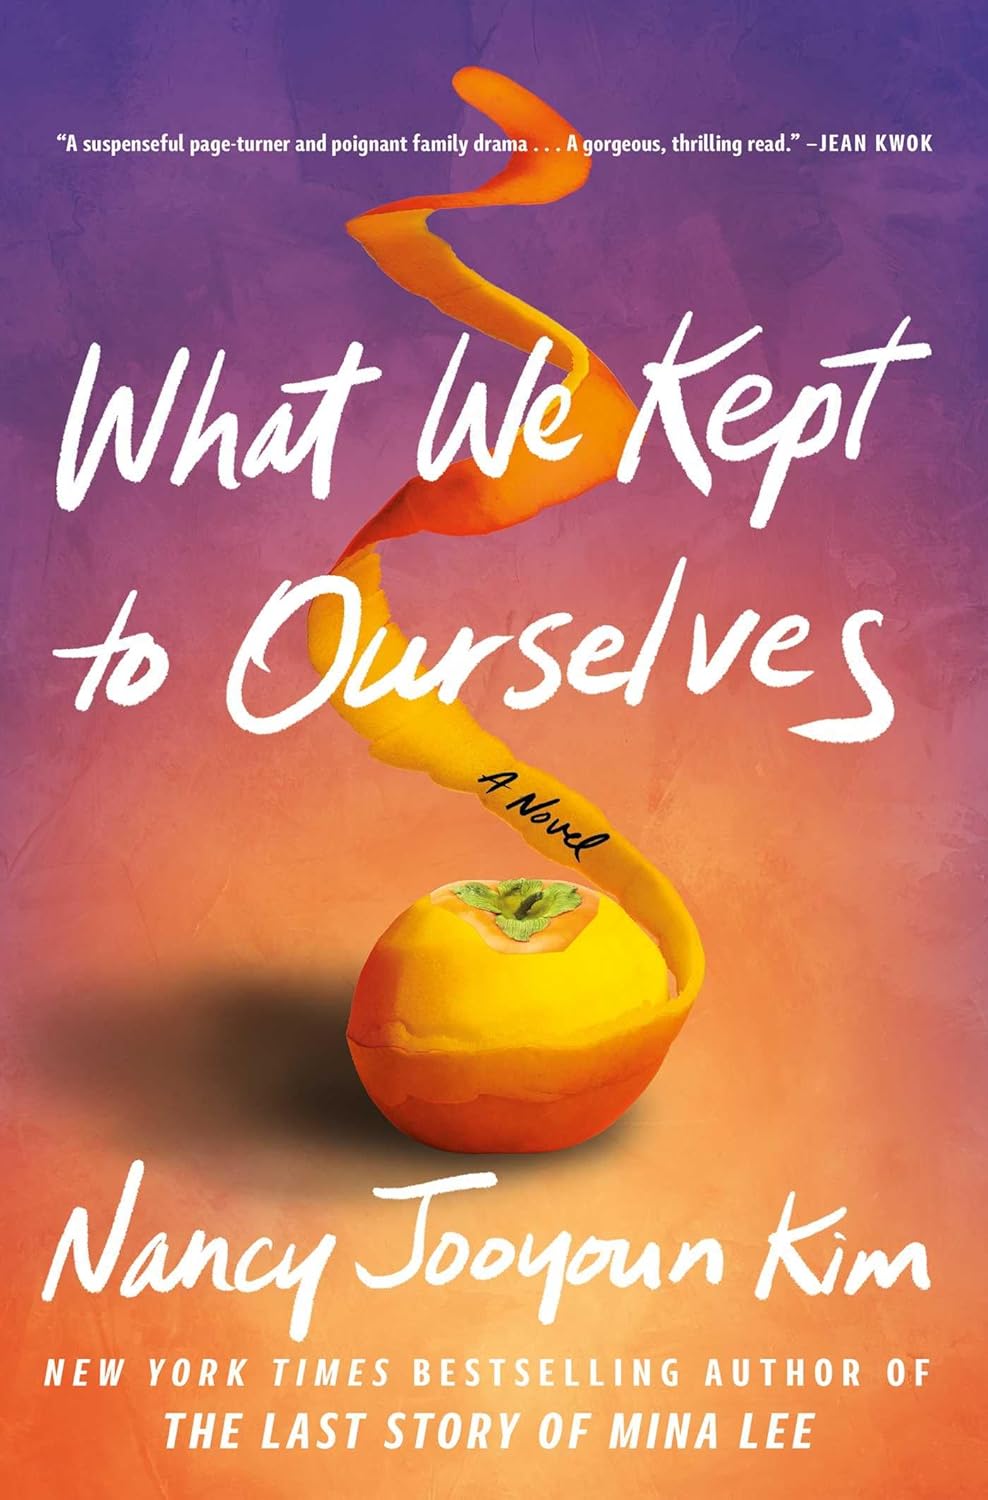 Image for "What We Kept to Ourselves"